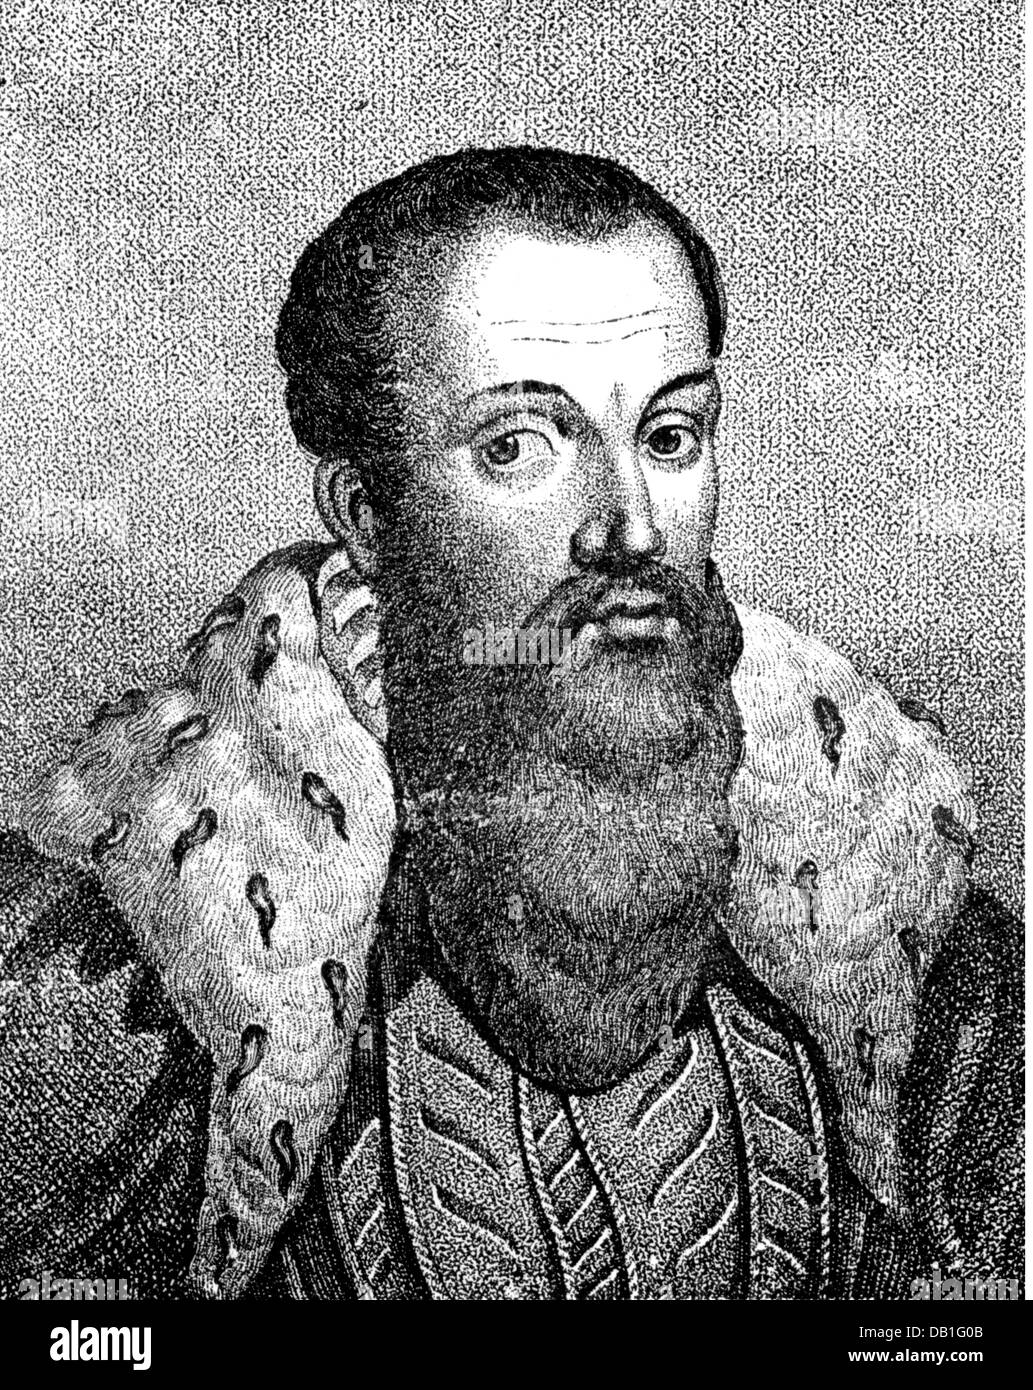 Maurice, 21.3.1521 - 11.7.1553, Prince-Elector of Saxony 18.8.1547 - 11.7.1553, portrait, wood engraving, 19th century, Stock Photo